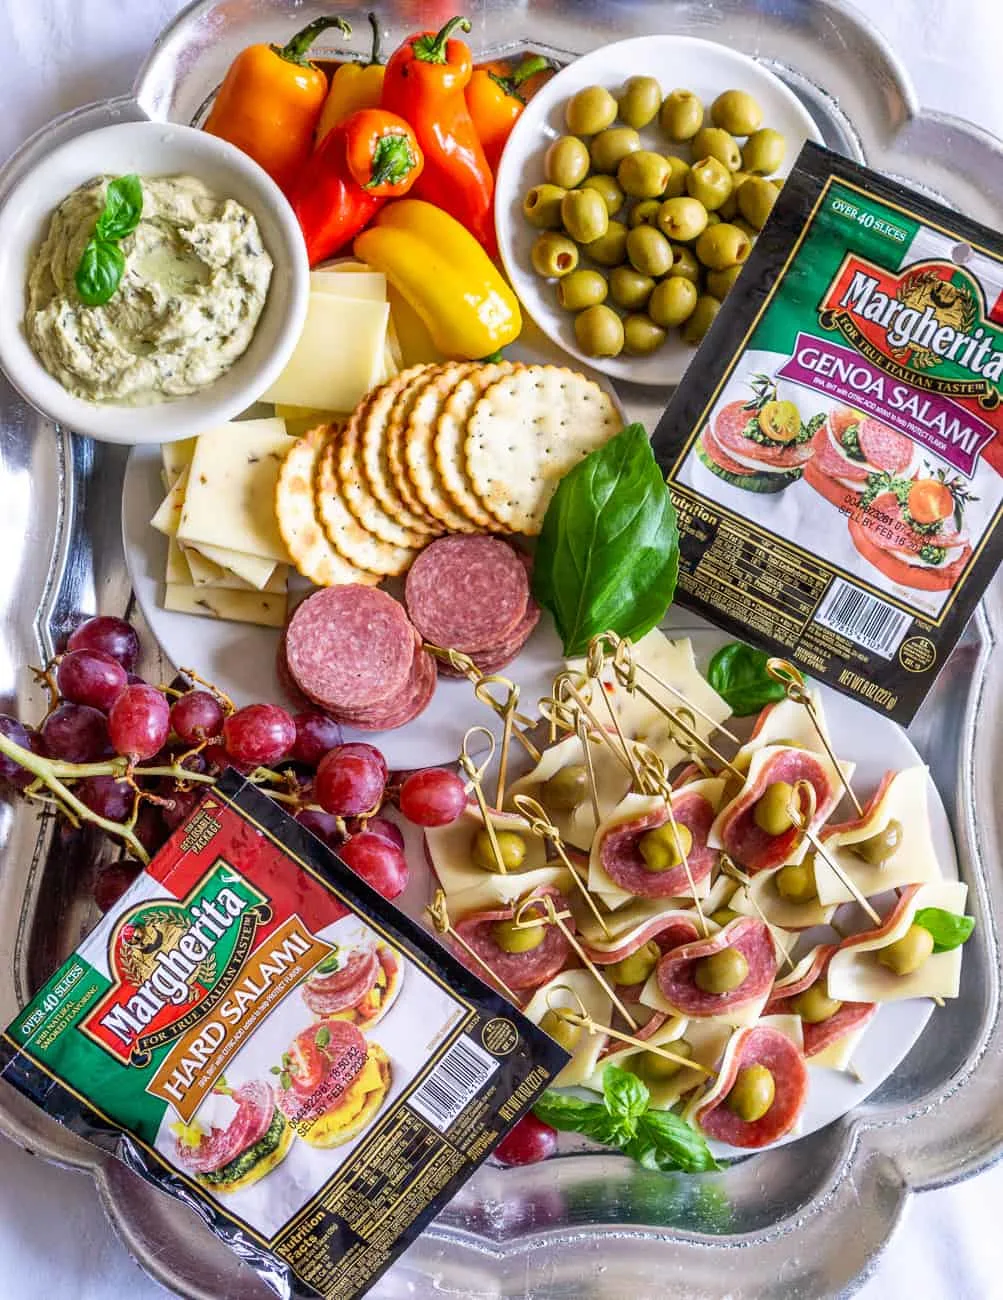 appetizer tray with a plate of salami appetizers, hummus, crackers, salami, cheese, grapes